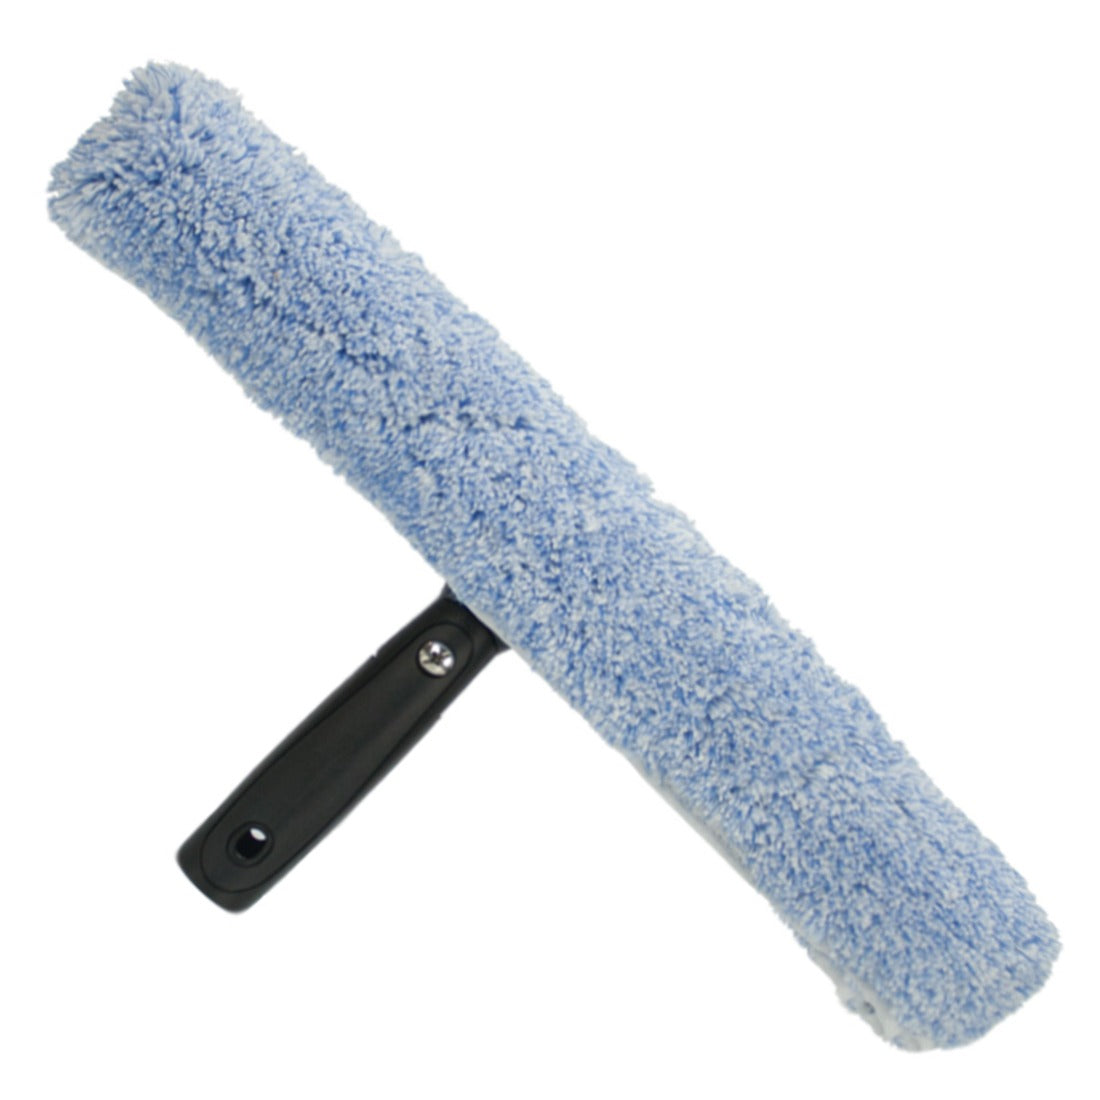 Polyte Windshield Cleaner Wand Microfiber Car Inside Window Cleaning Tool